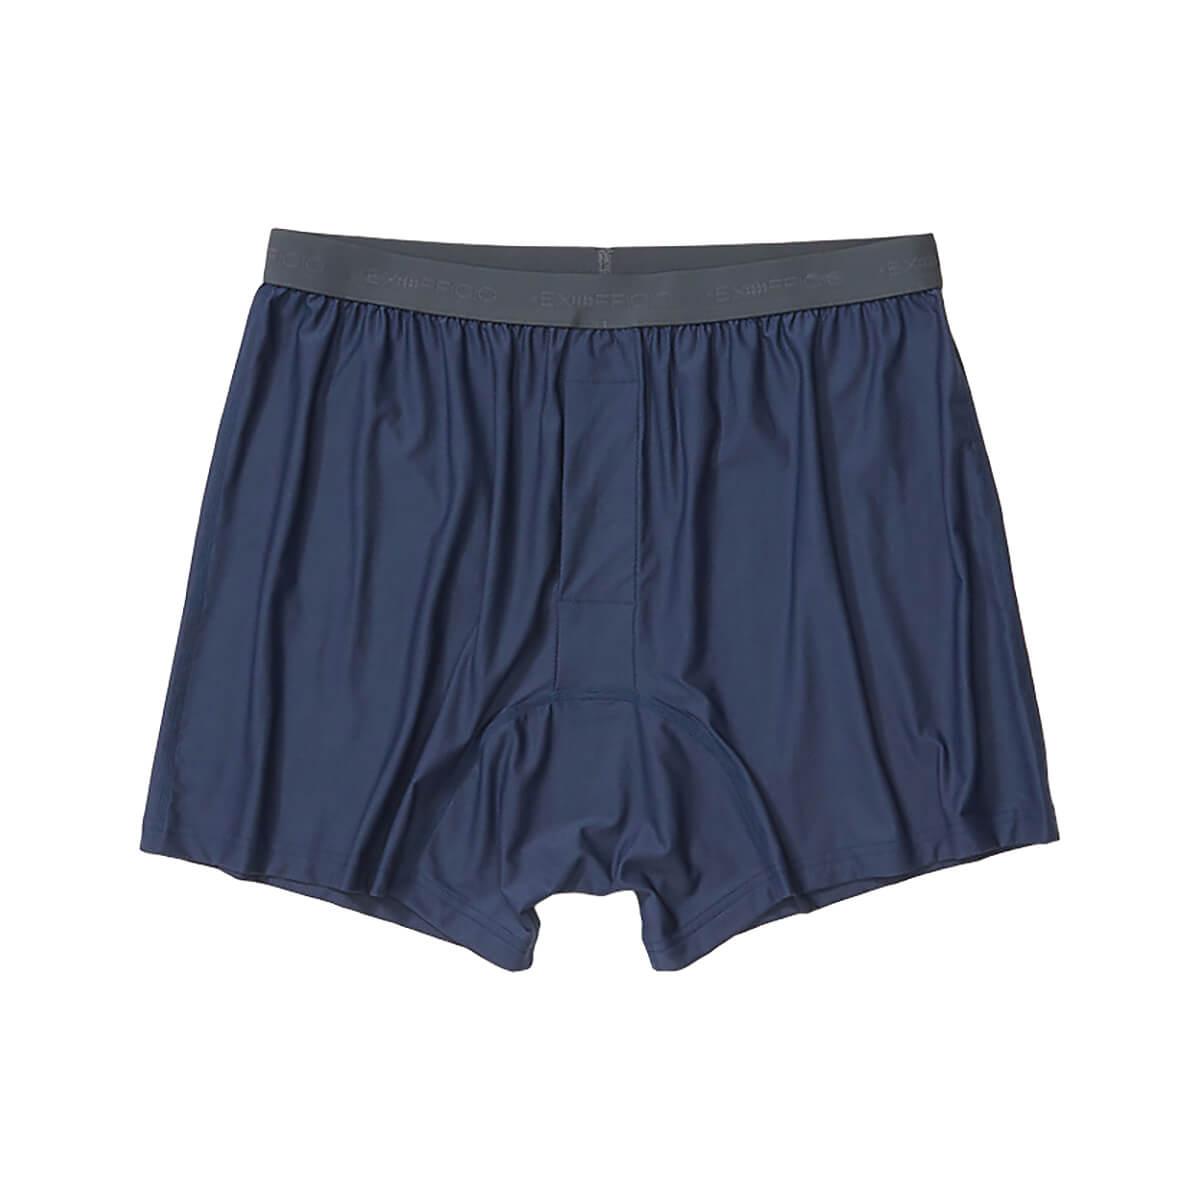 Mast General Store | Men's Give-N-Go Boxer